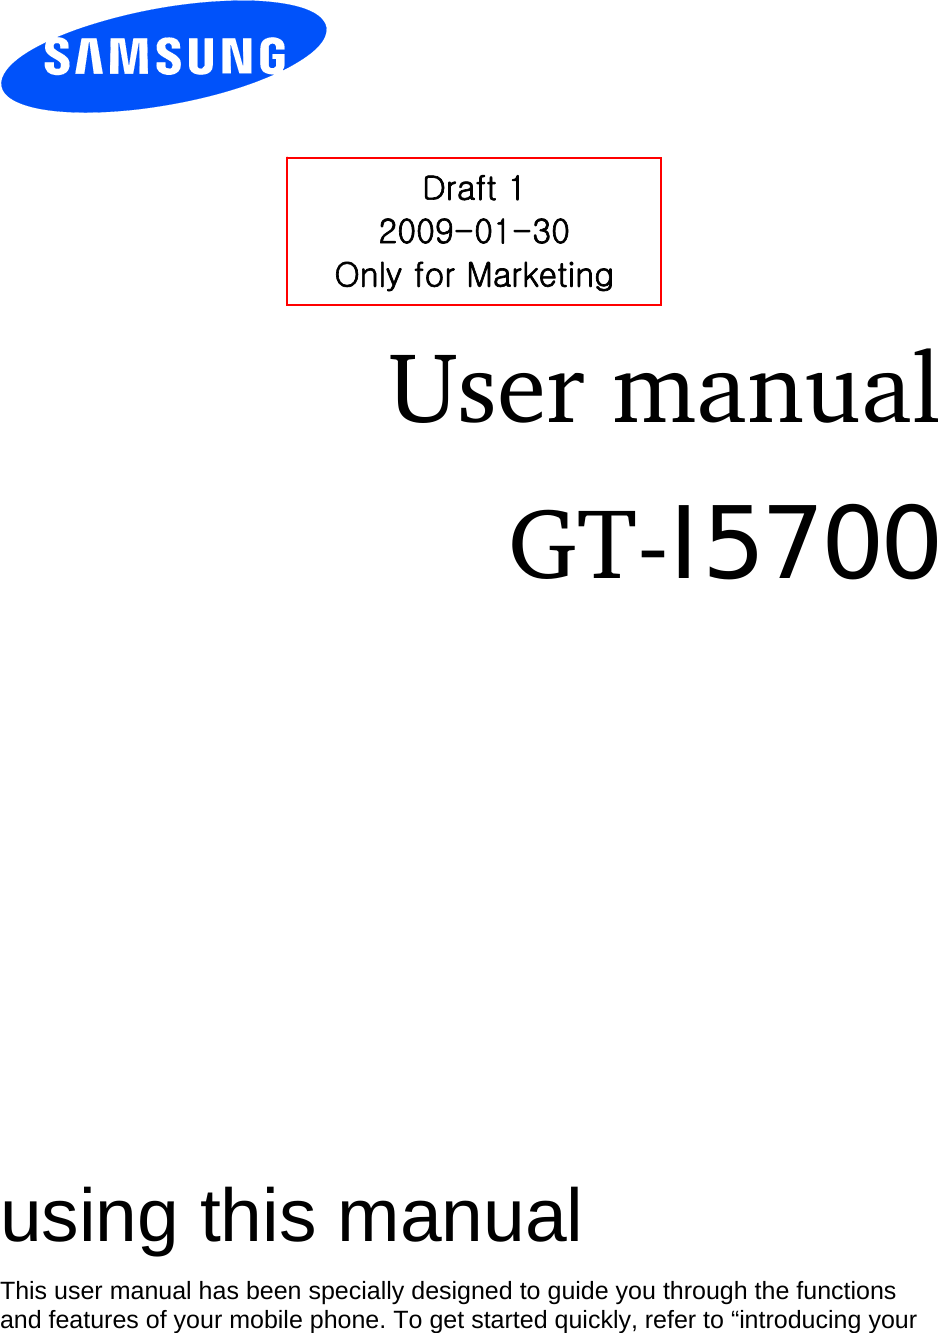            User manual GT-I5700                  using this manual This user manual has been specially designed to guide you through the functions and features of your mobile phone. To get started quickly, refer to “introducing your Draft 1 2009-01-30 Only for Marketing 